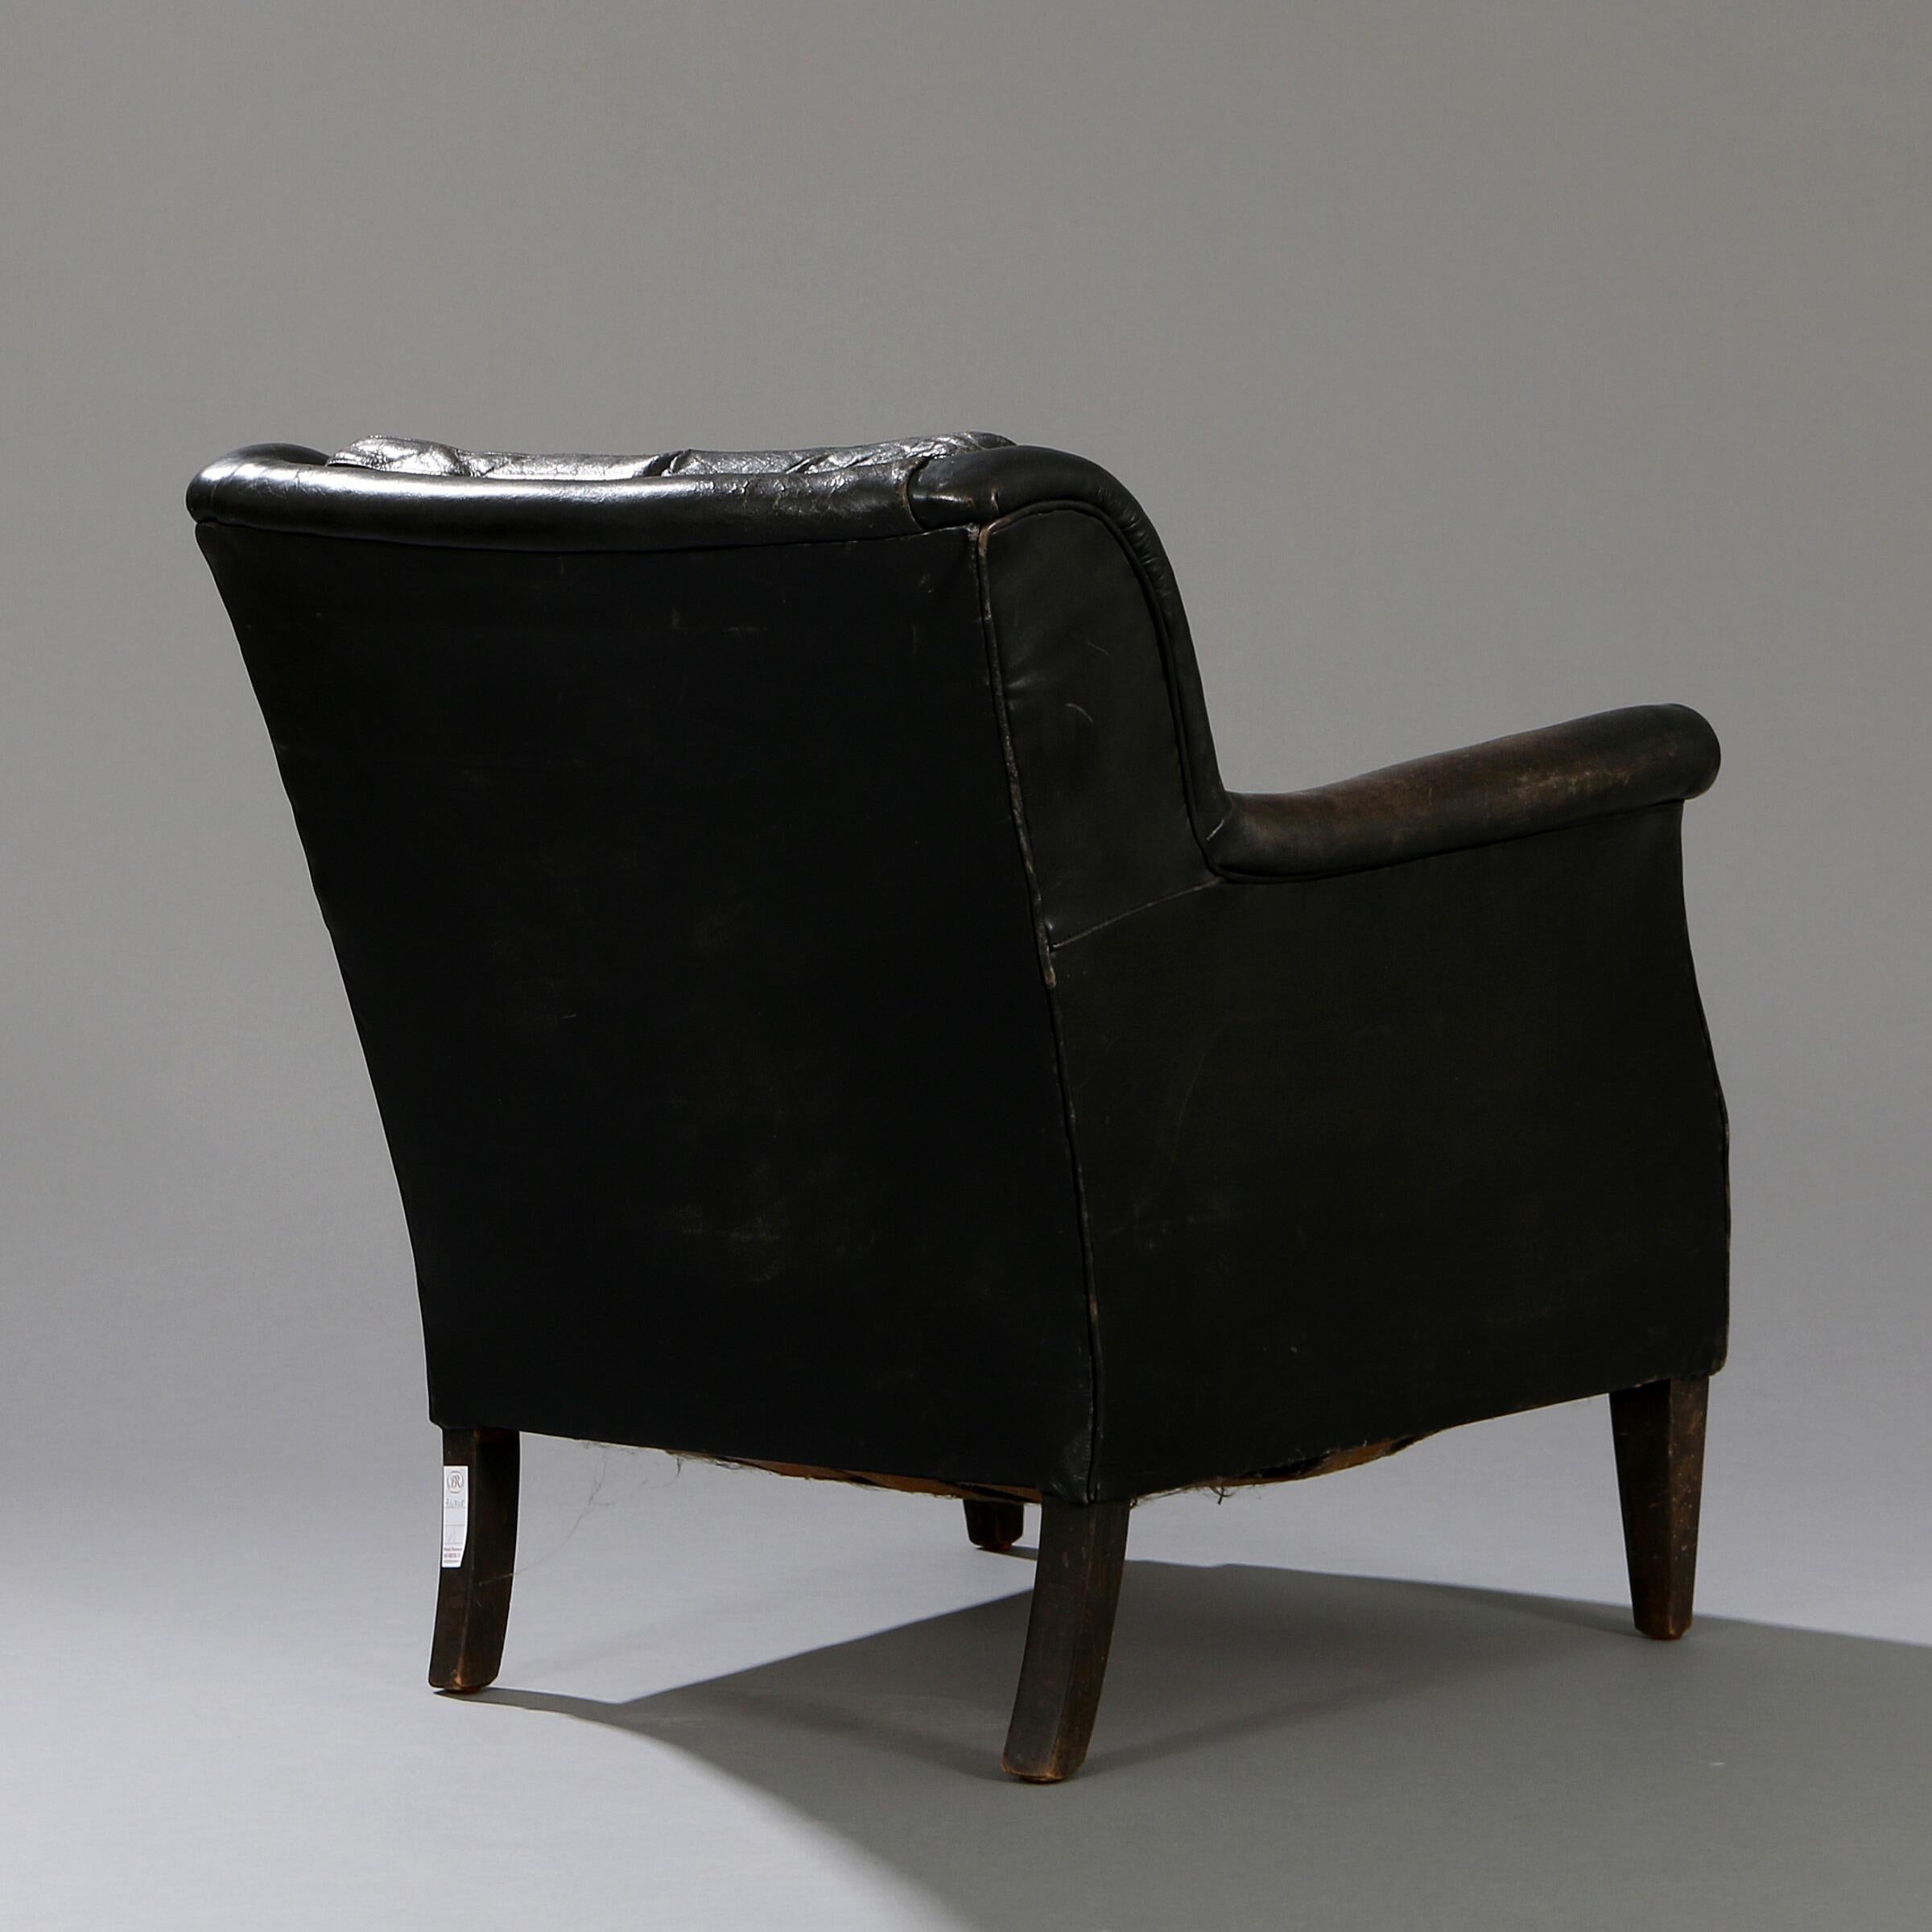 European Black Leather Sofa and Armchair Attributed to Frits Henningsen, C1950s For Sale